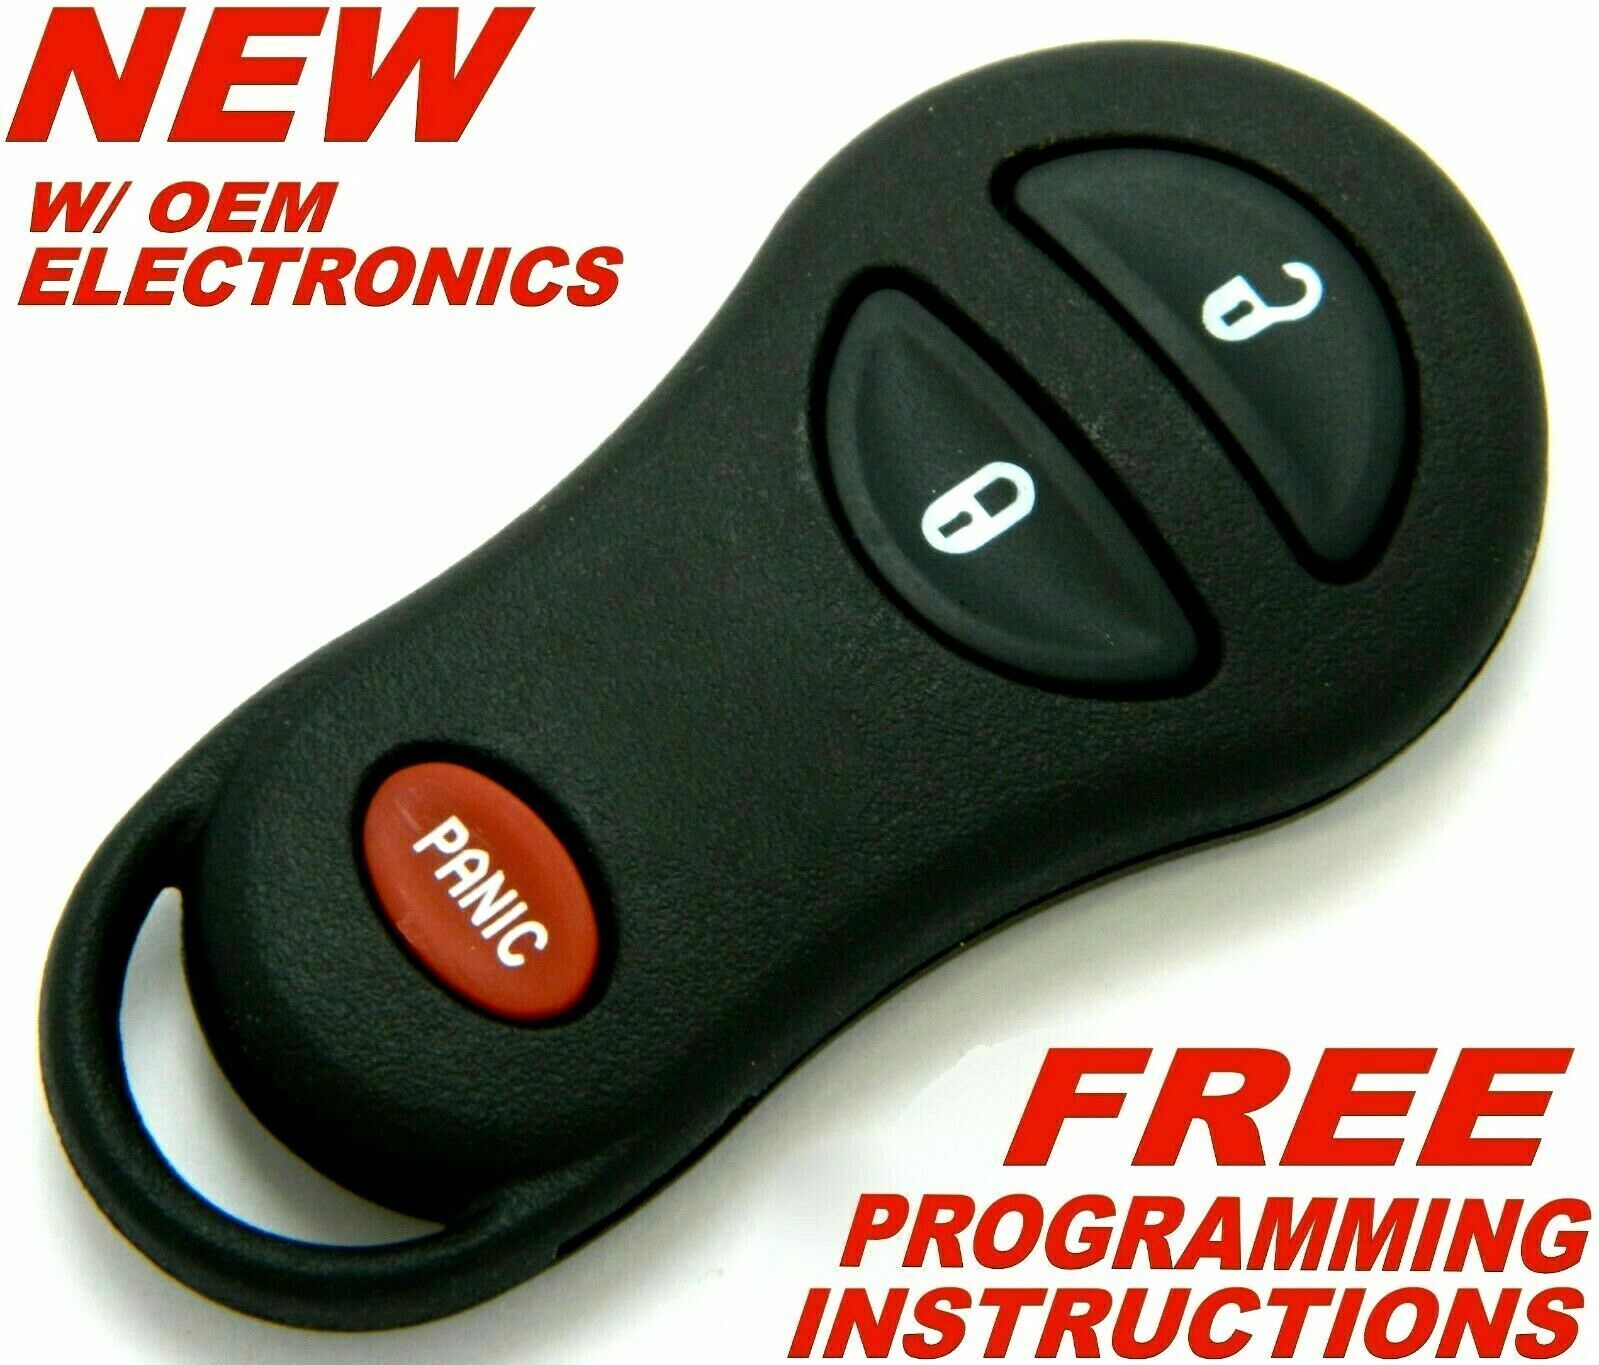 OEM ELECTRONIC 3 BUTTON KEYLESS REMOTE FOB FOR  2001 - 2005 CHRYSLER DODGE 